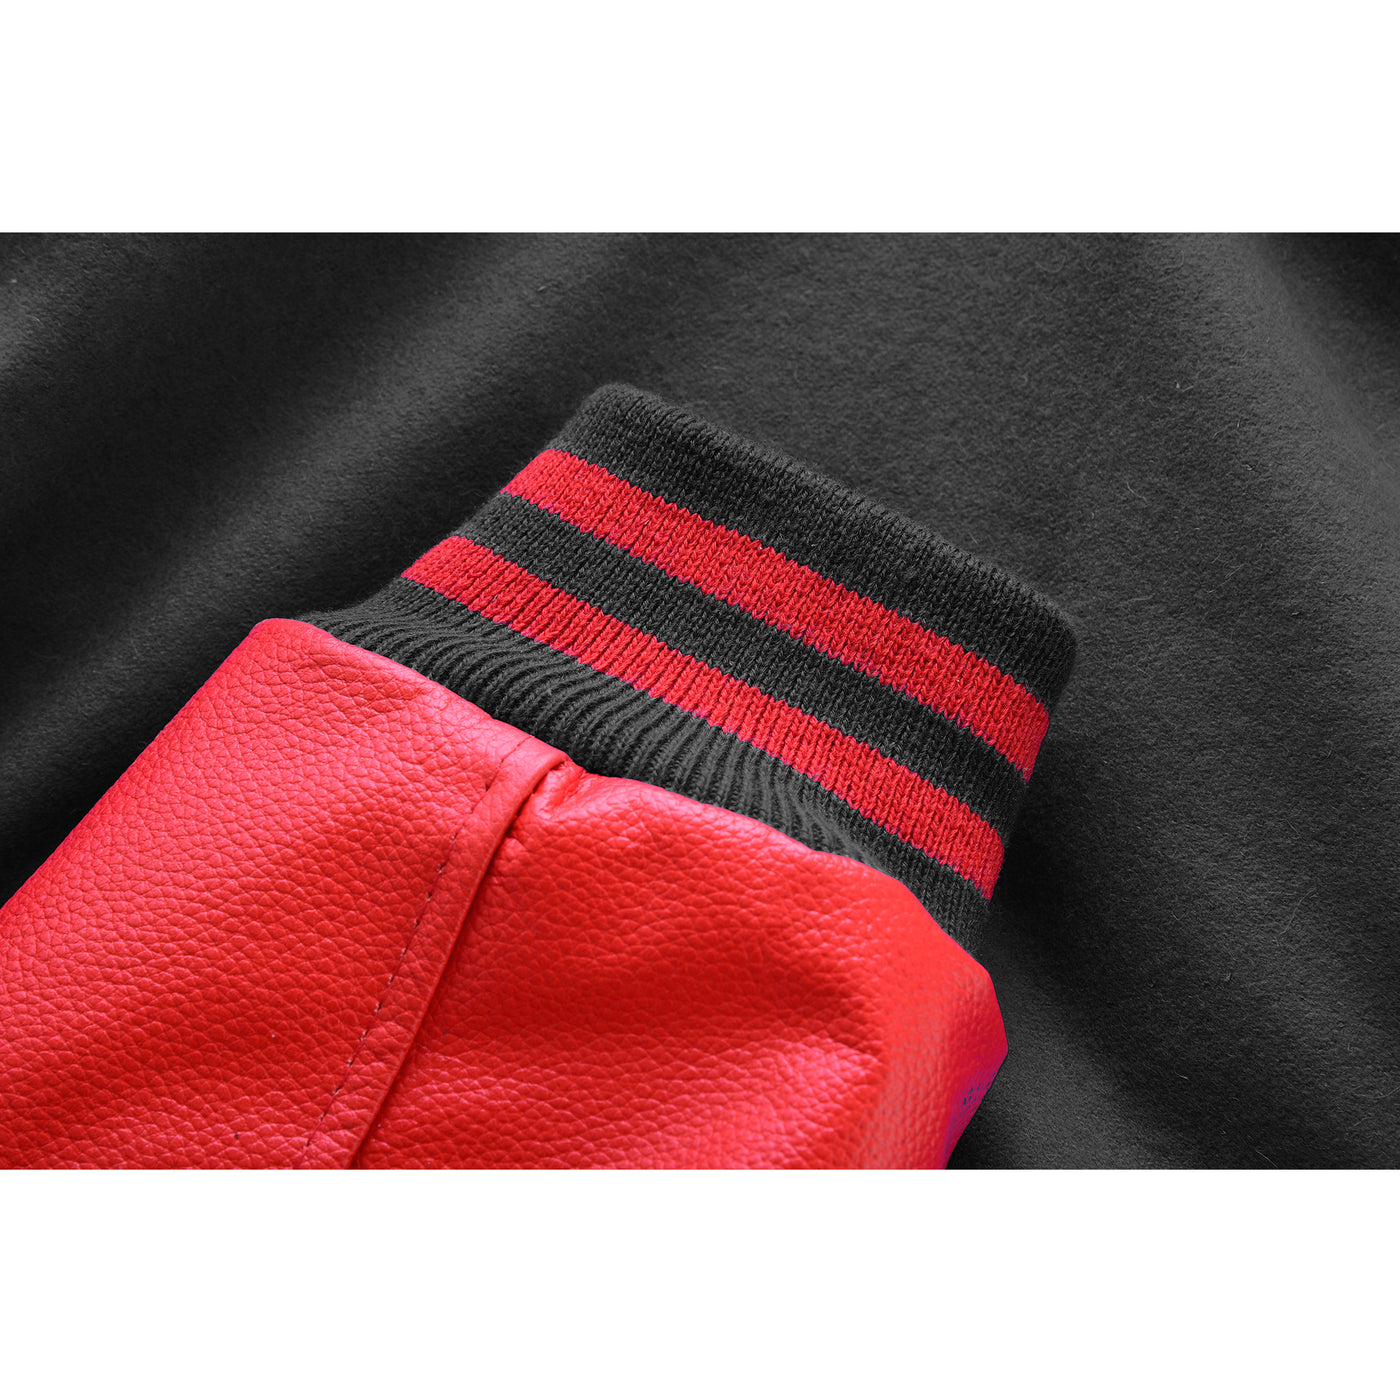 Classic Varsity Letterman Jacket Black Wool with Red Genuine Leather Sleeves and trims